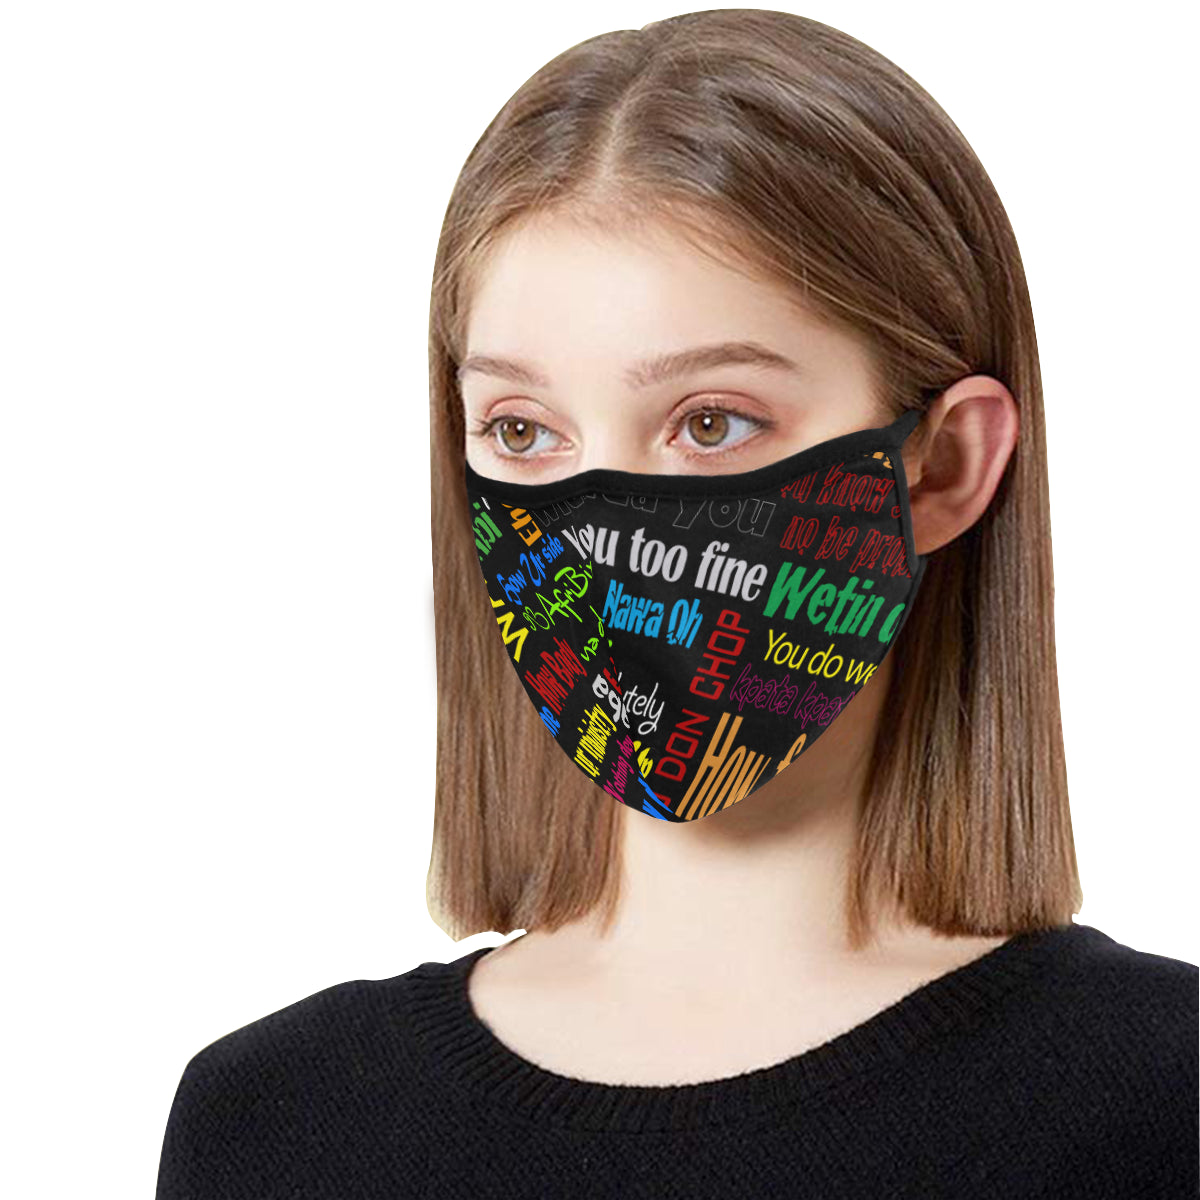 AfriBix Pidgin Print Noir Cotton Fabric Face Mask (30 Filters Included) - Non-medical use